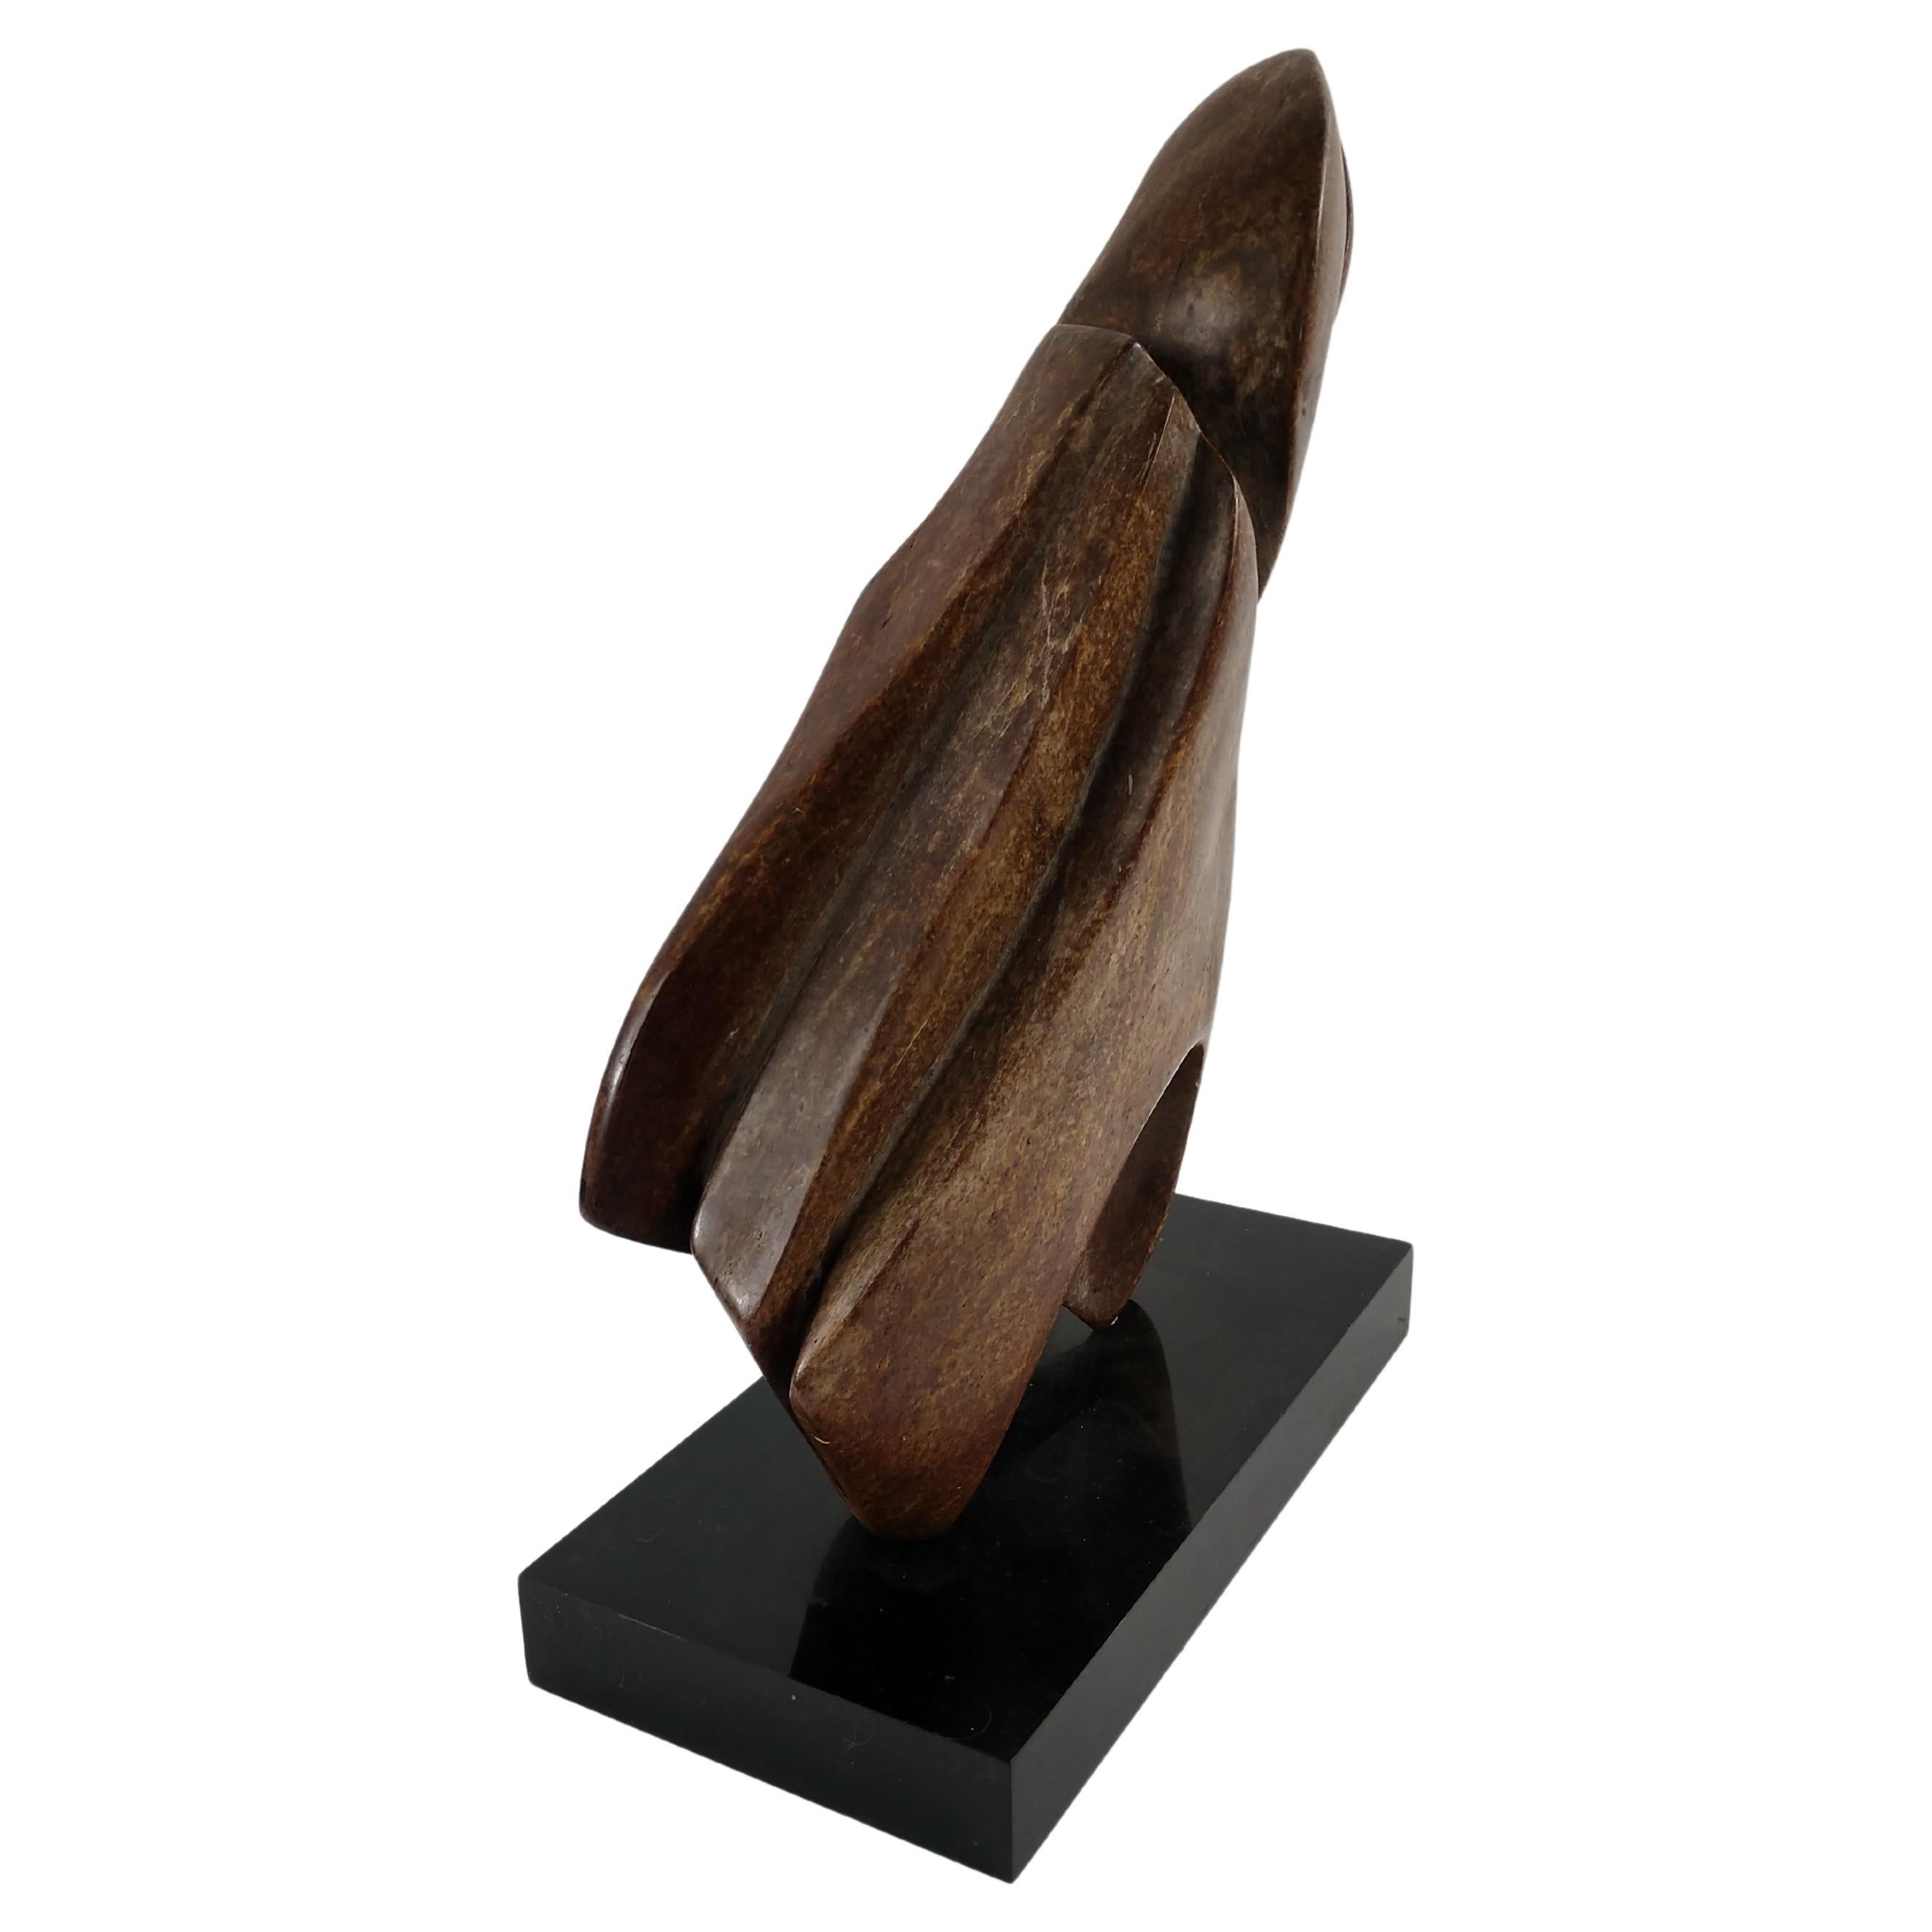 Carved stone by abstract outsider artist Louise Abrams.
This particular piece is from the artists personal collection of her own art.
Sits on a black laminate plinth base. This item can be parcel posted. We have several other works by Louise Abrahms